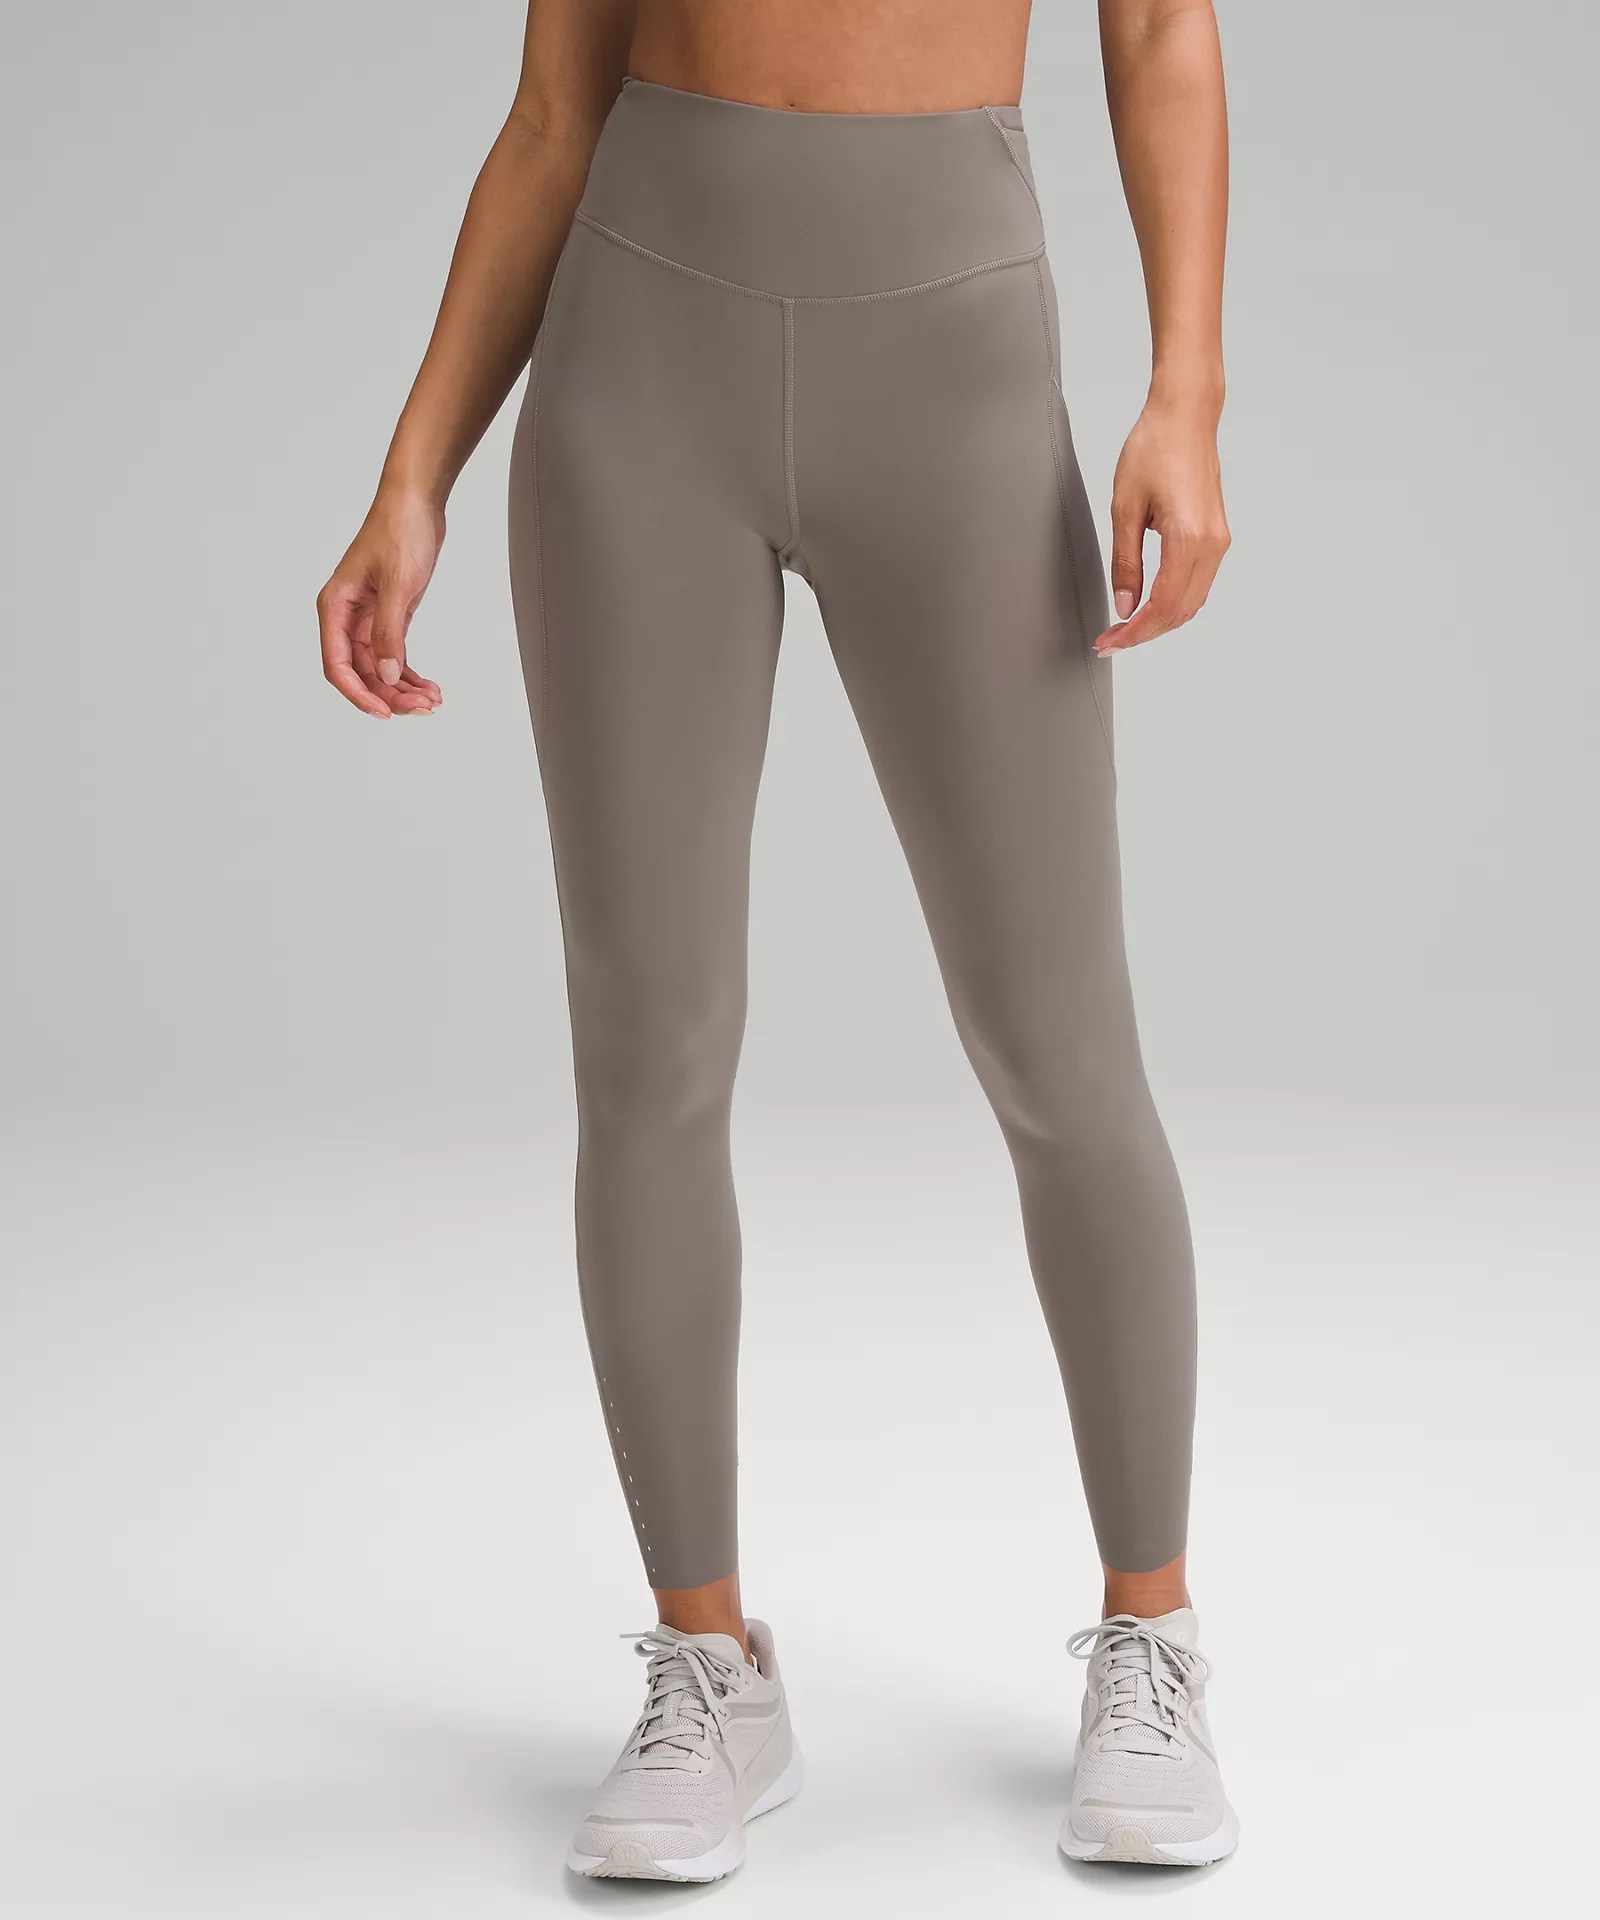 Leggings for Exercise and Comfort